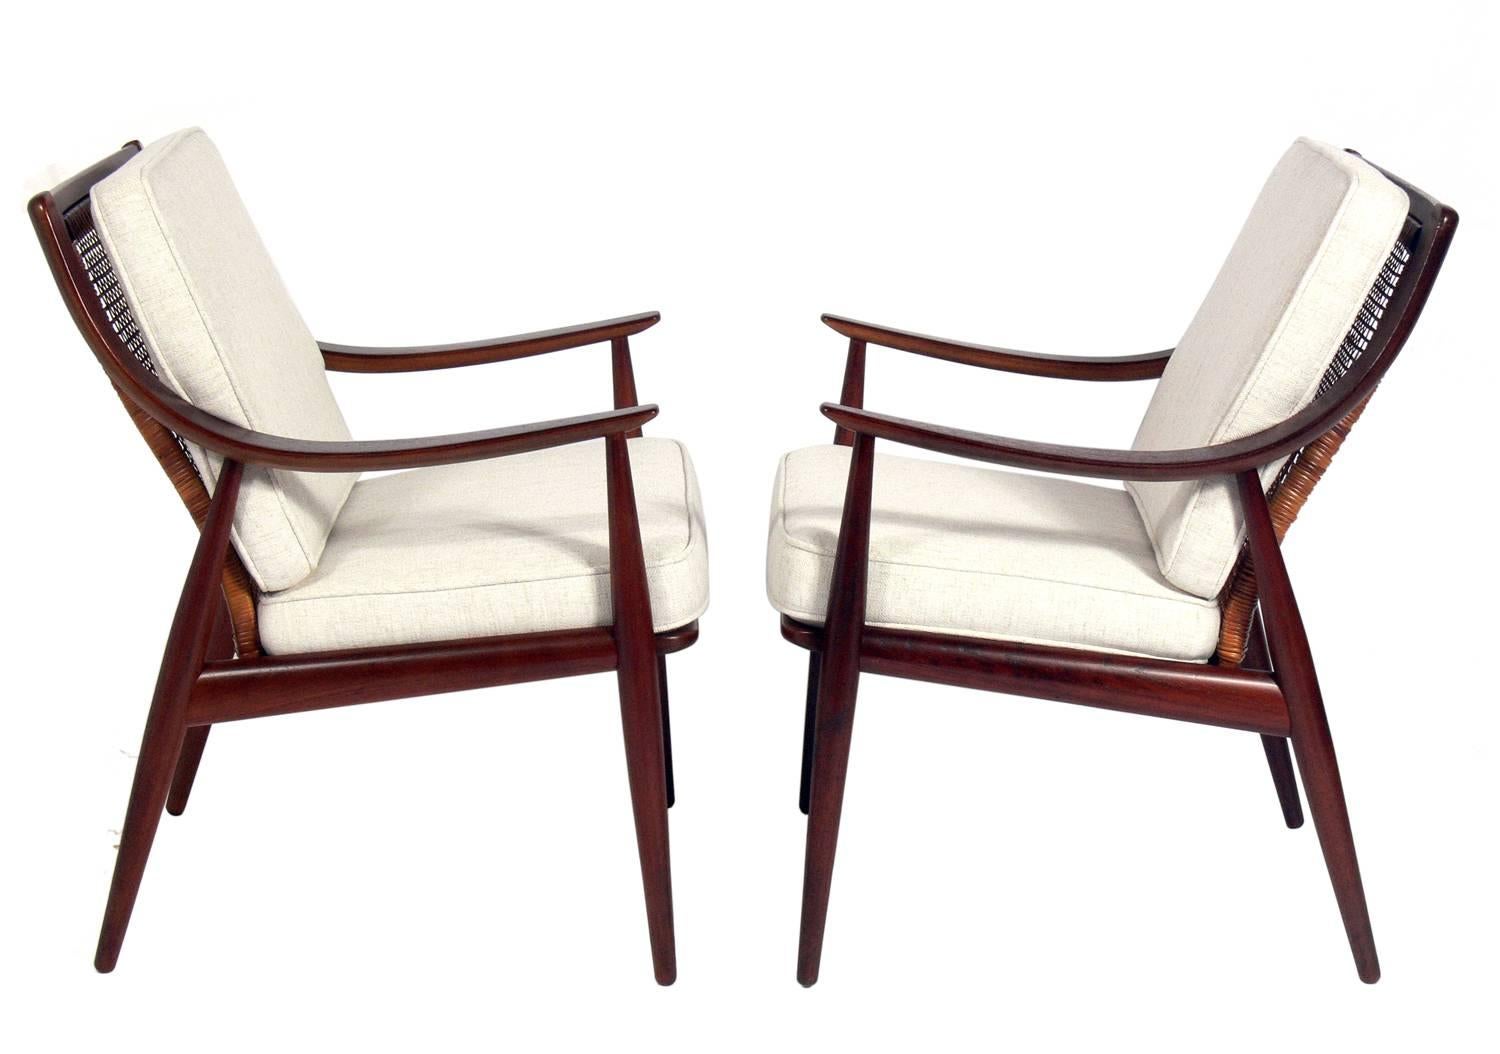 Pair of Danish modern lounge chairs, designed by Ib Kofod-Larsen for France & Daverkosen, Danish, circa 1950s. They came out of the same estate, and are a near pair, as the caning on the backs varies slightly. See last photos. They have been